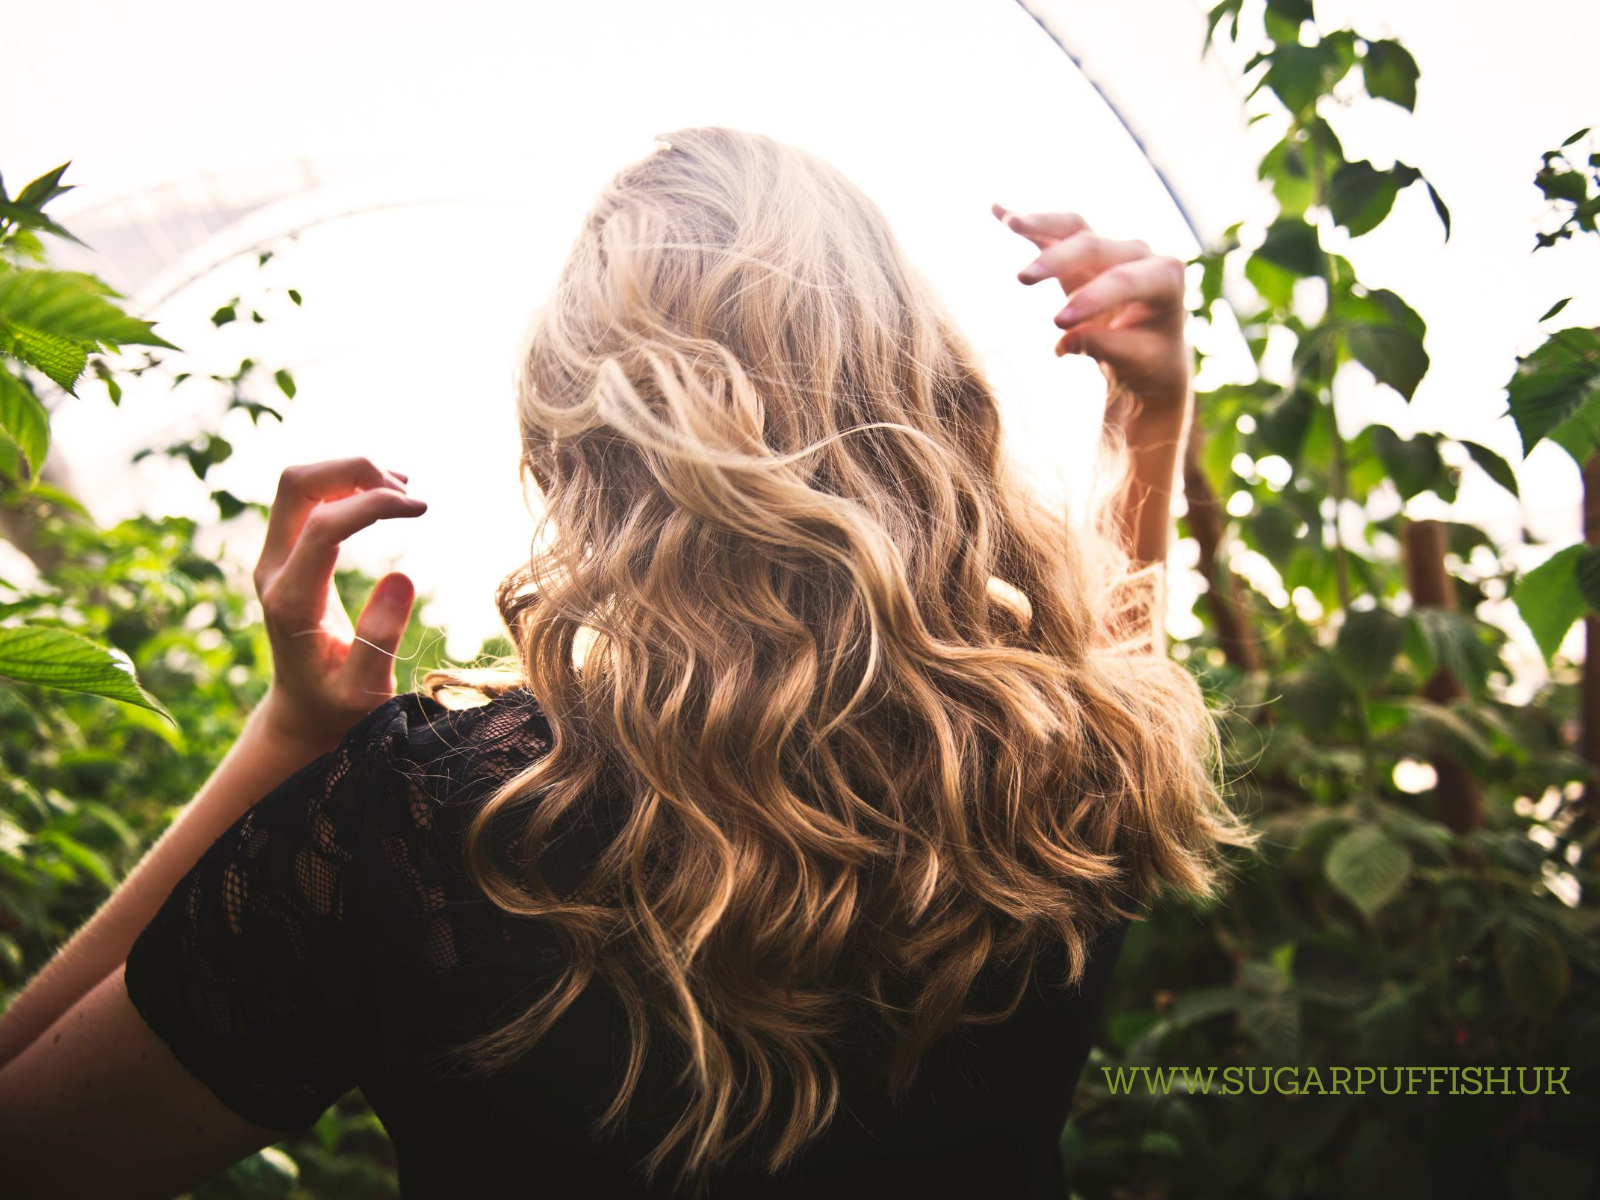 Looking for natural shampoos for a bad hair day!